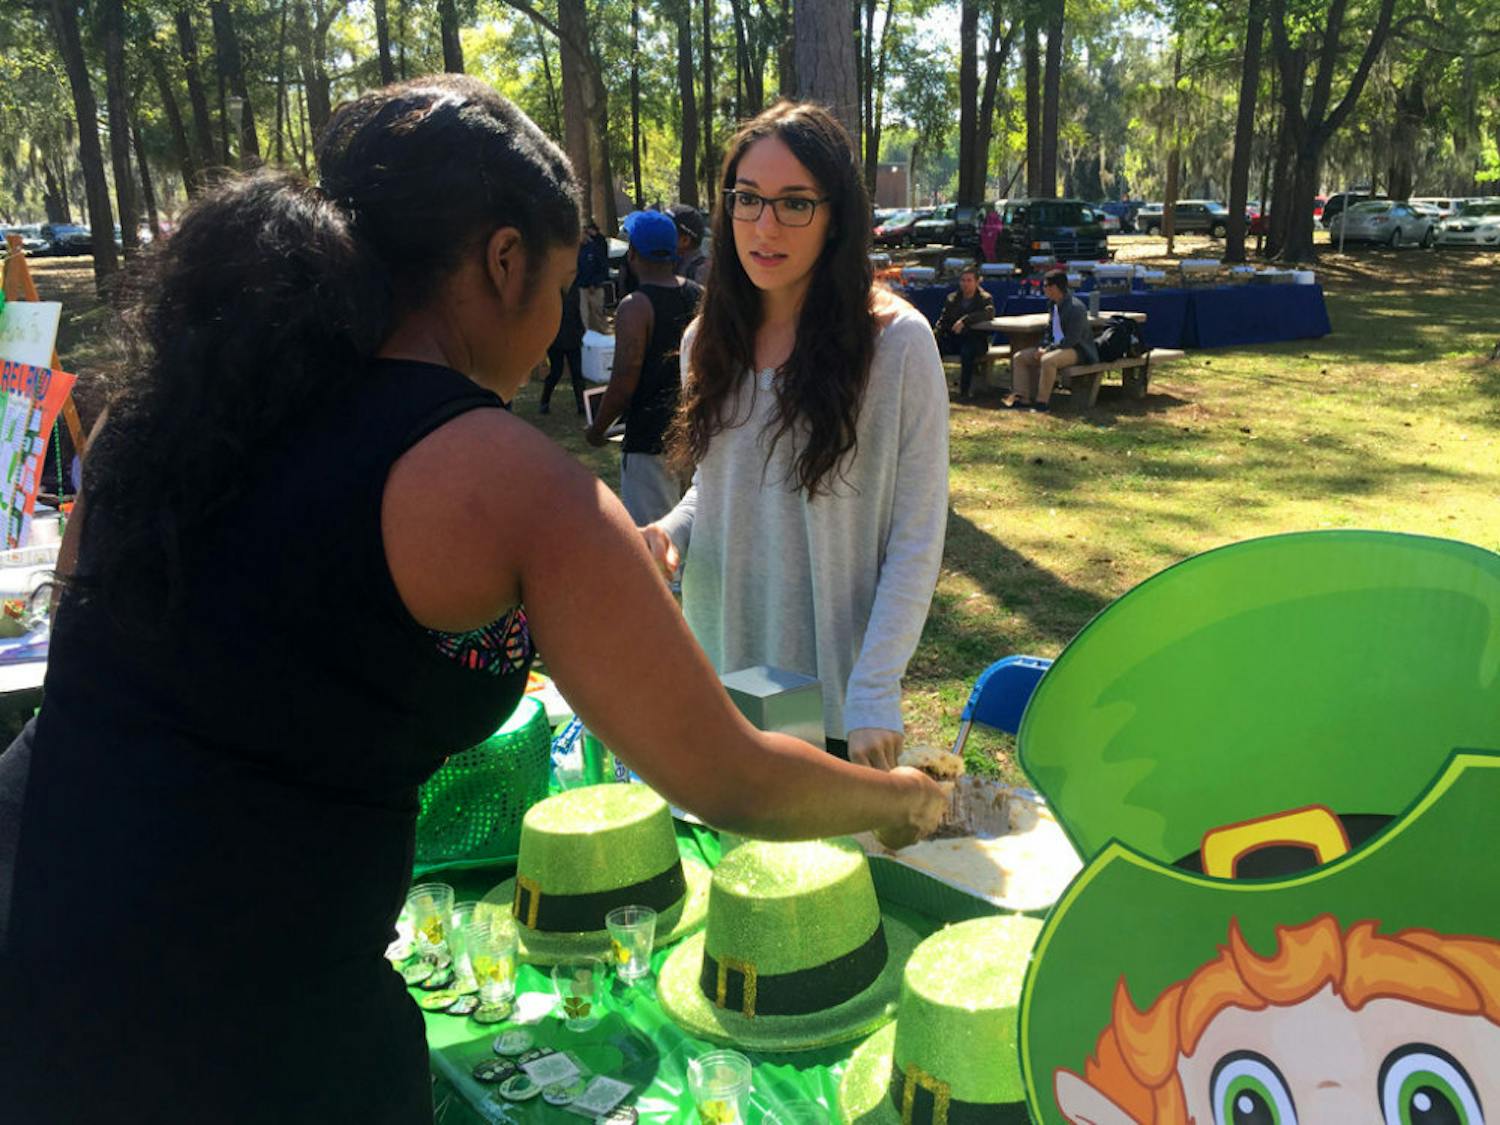 Kelsey Pena, right, the treasurer of UF’s Association of Public Interest Law, serves a student shepherd's pie, which was part of the Ireland table at the 10th Annual Multicultural Fair at the Levin College of Law on Tuesday.